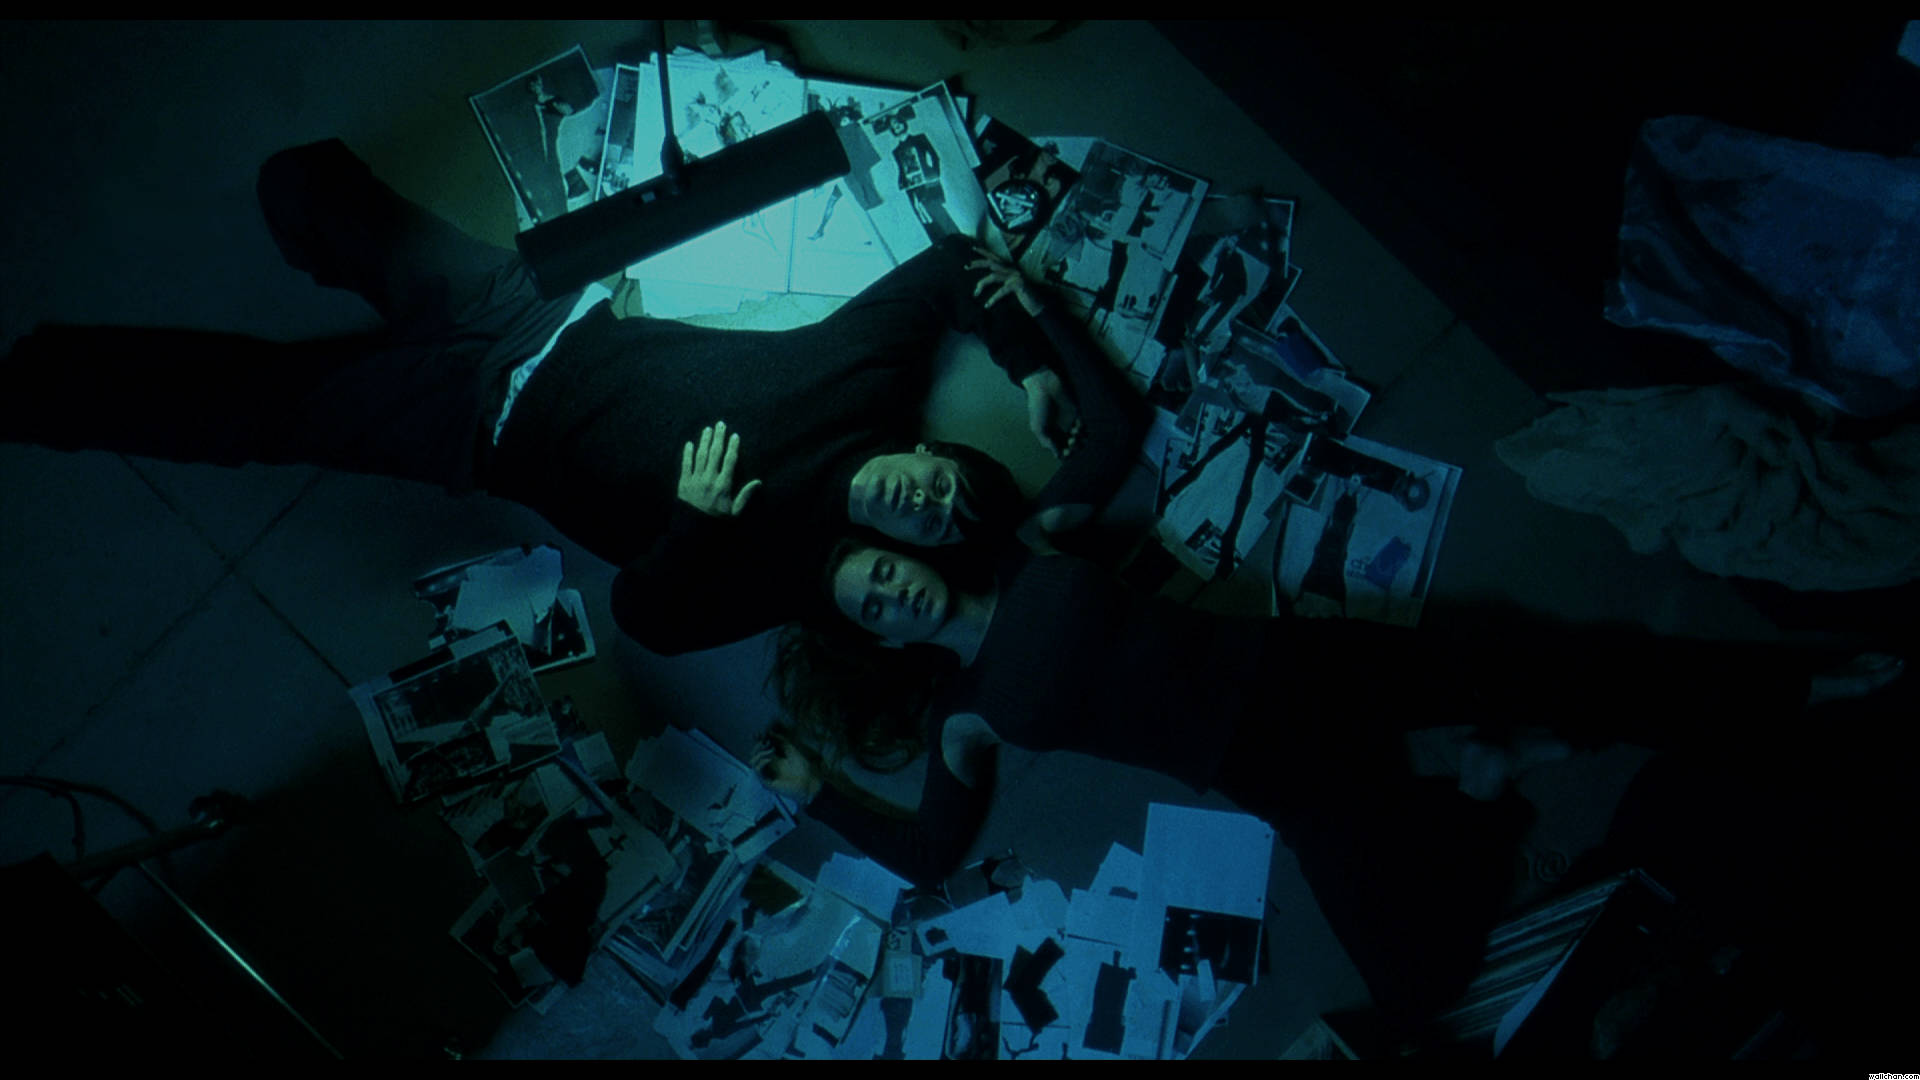 "A compelling still from Requiem For a Dream" Wallpaper